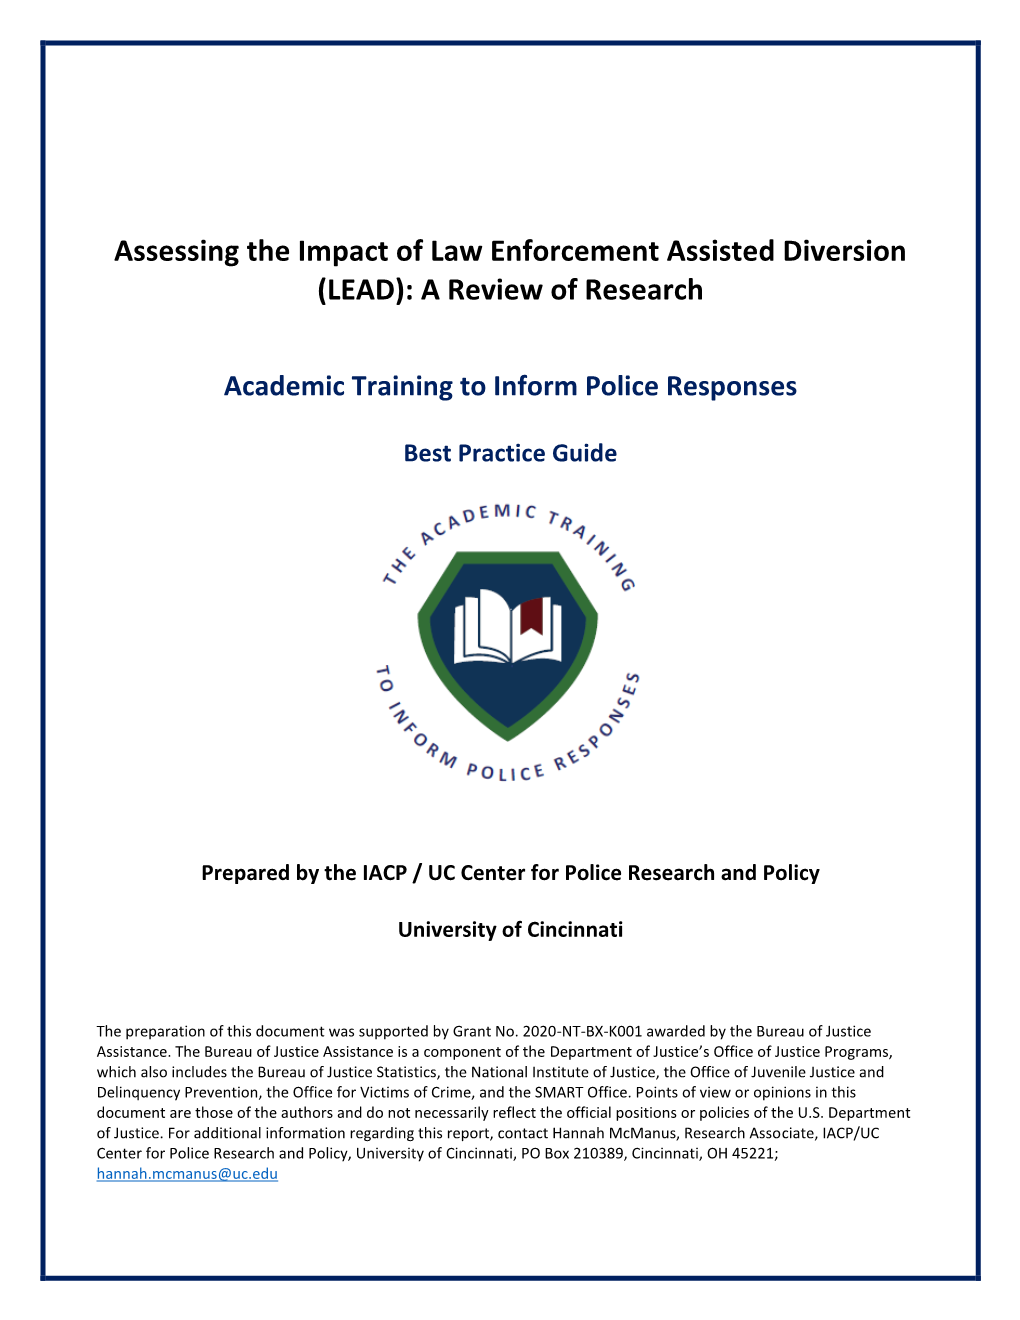 Law Enforcement Assisted Diversion (LEAD): a Review of Research